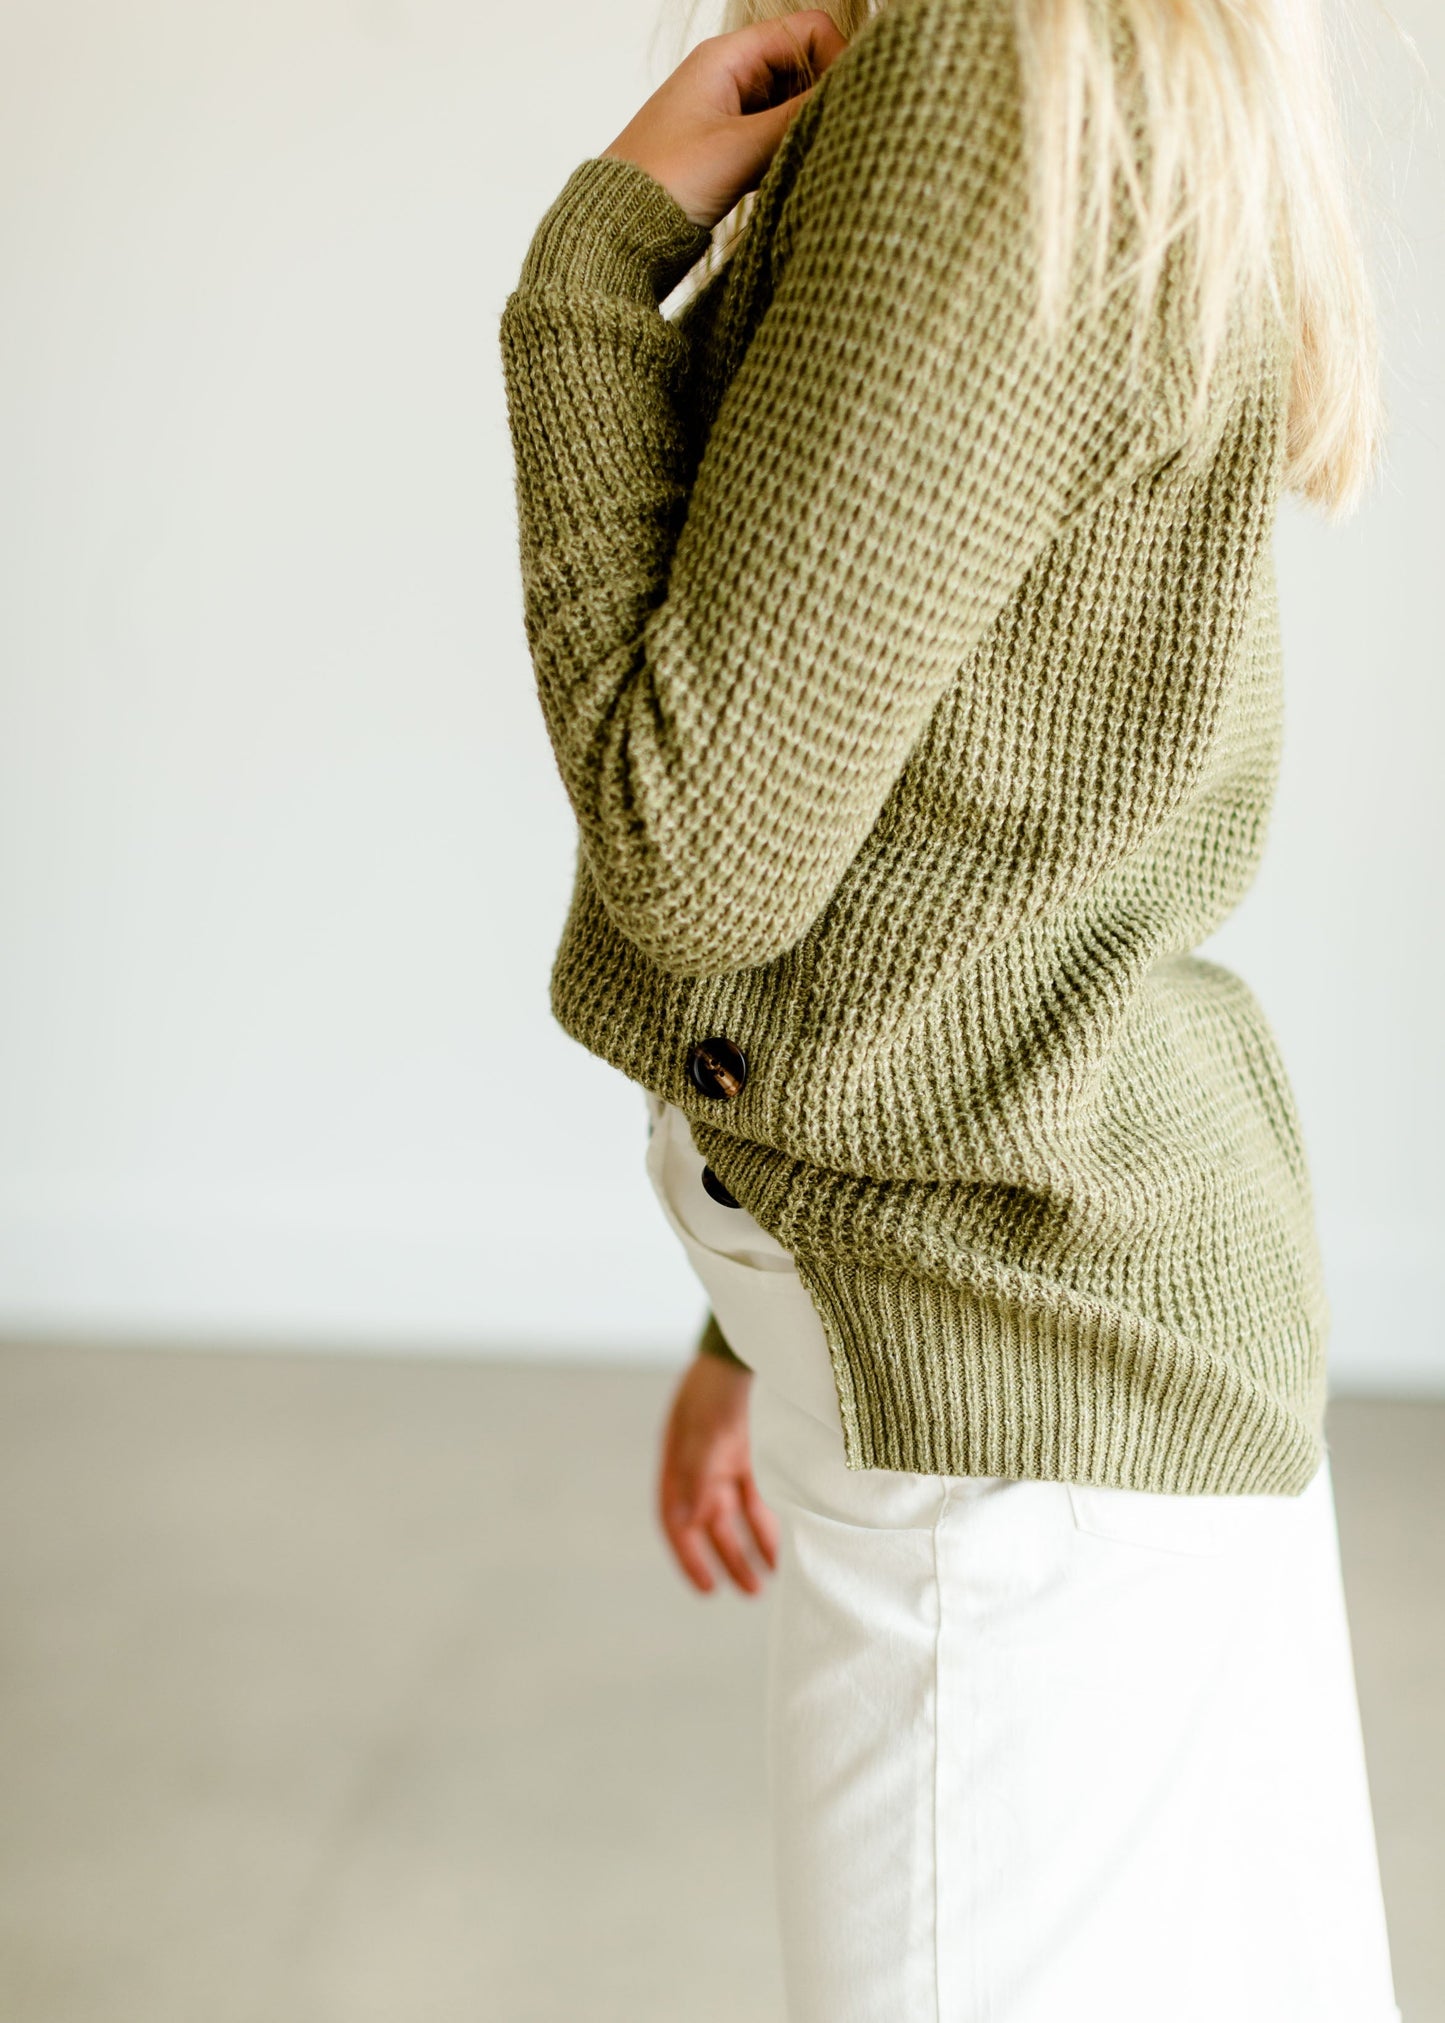 Waffle Knit Side Button Crew Neck Sweater FF Tops